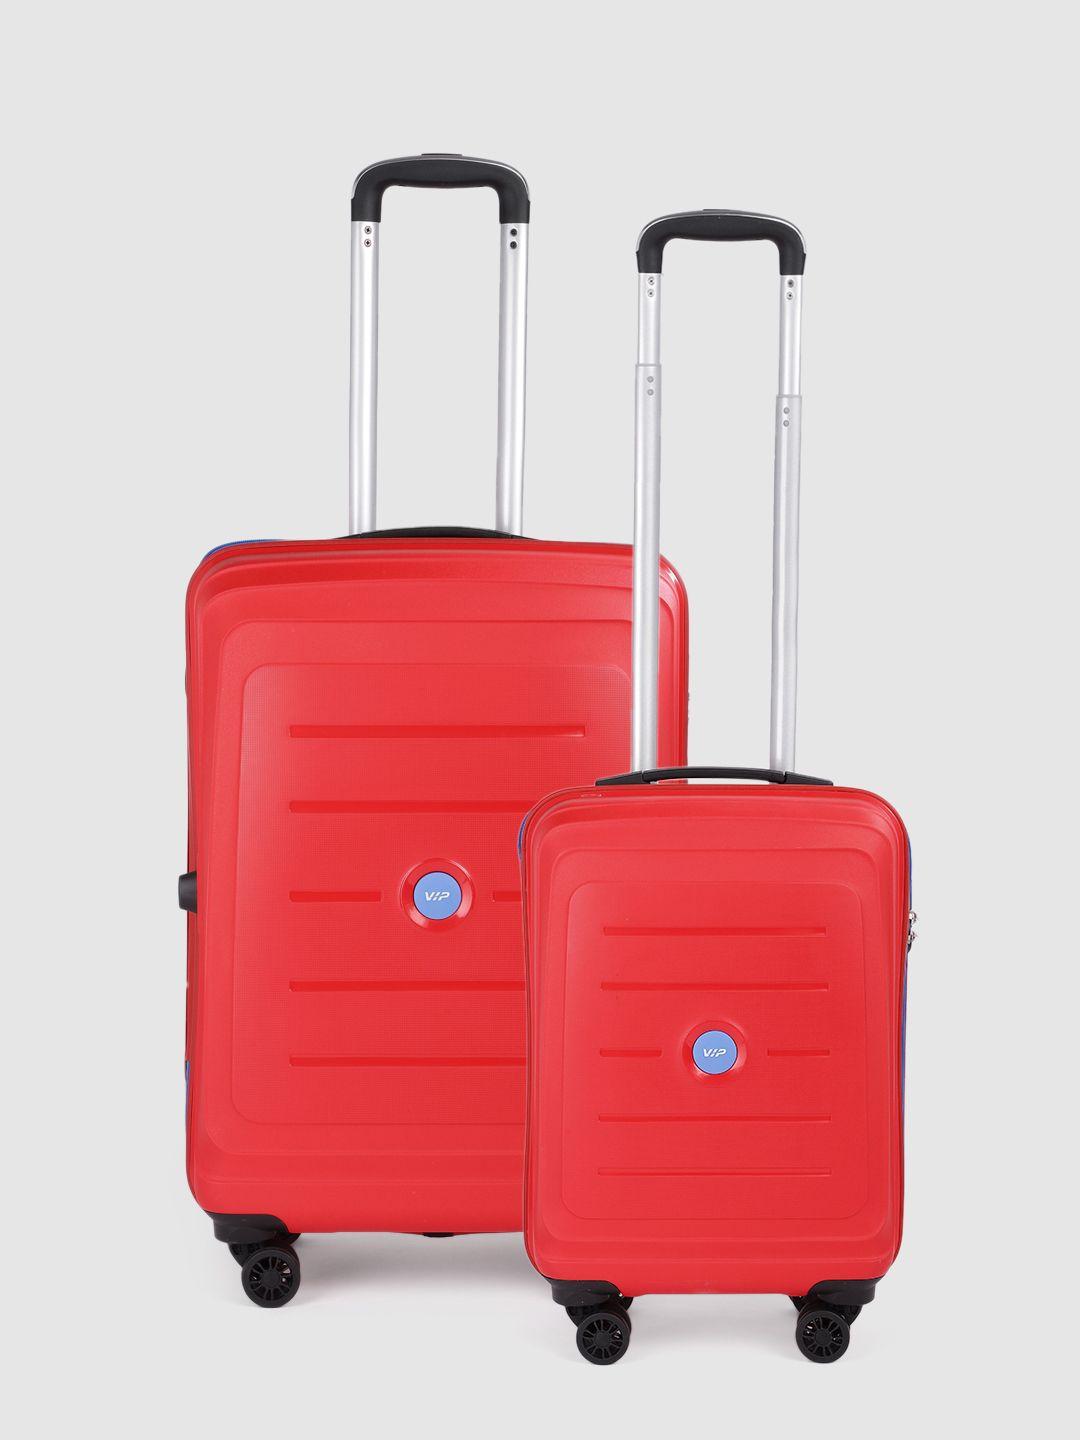 vip-corsa-set-of-2-hard-sided-textured-trolley-suitcases---cabin-and-medium